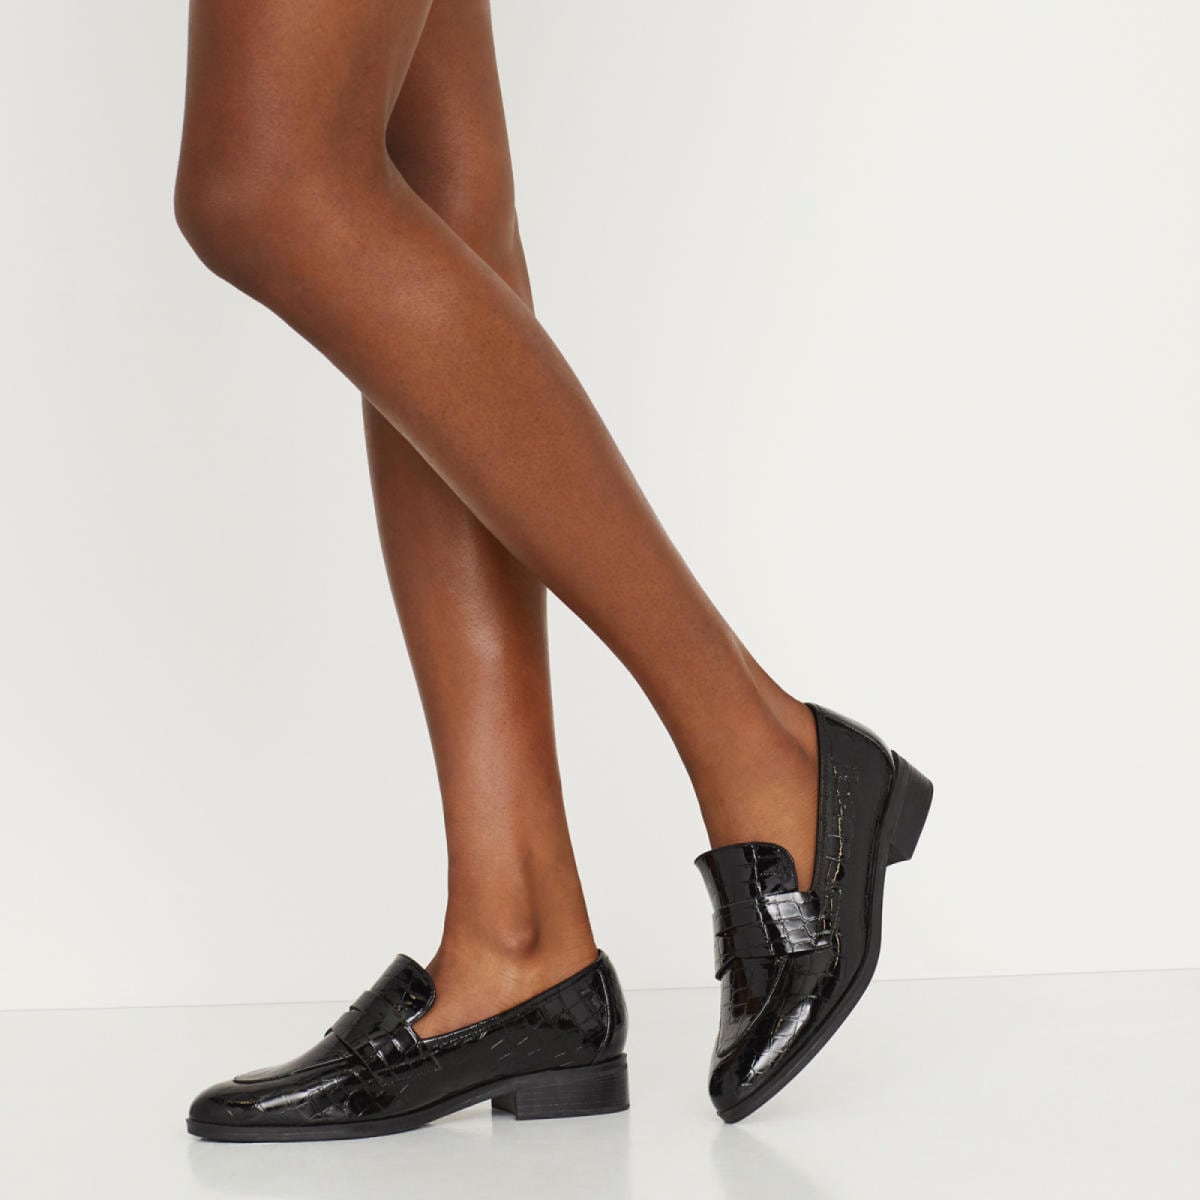 Agroania Black Women's Loafers 